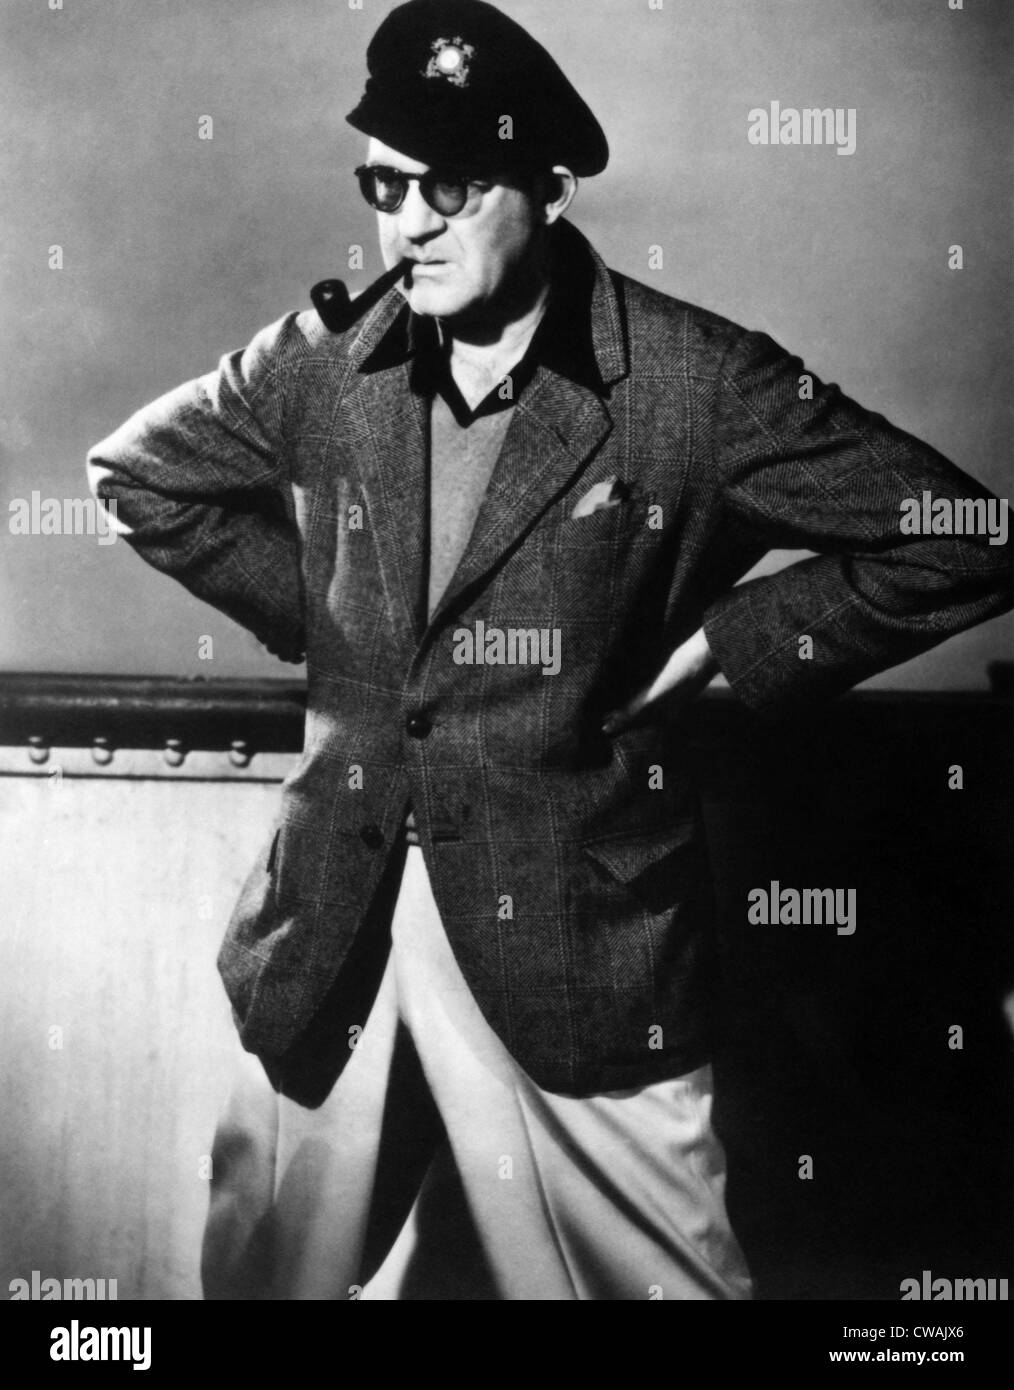 Film director John ford, c. 1940s. Courtesy CSU Archives/Everett Collection. Stock Photo